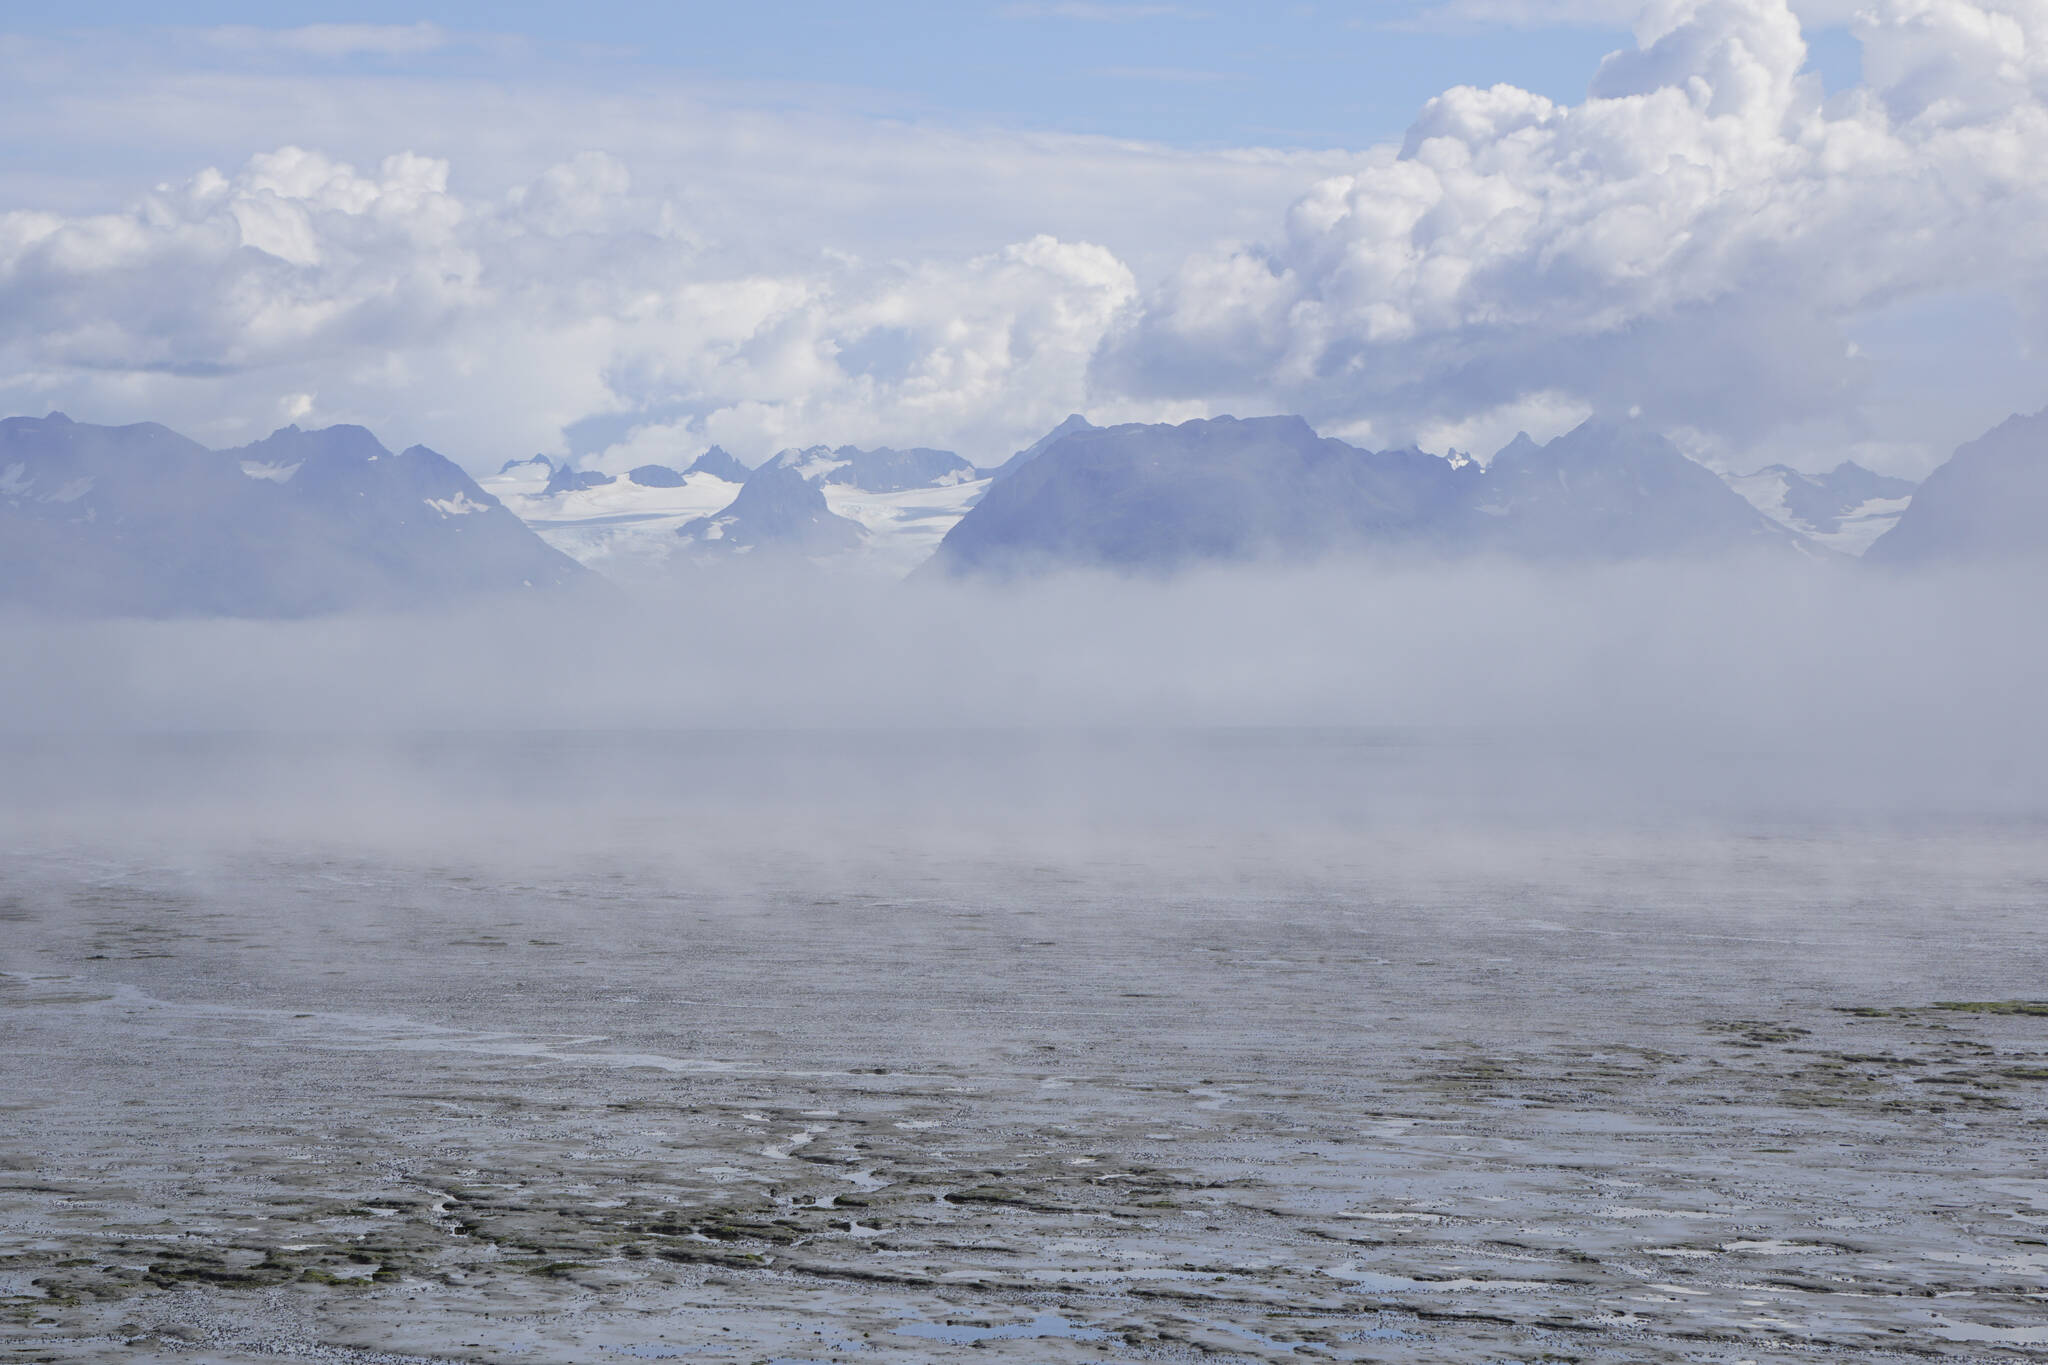 Fog rolls over Mud Bay on Monday, Aug. 29, 2022, in Homer, Alaska. (Photo by Michael Armstrong/Homer News)